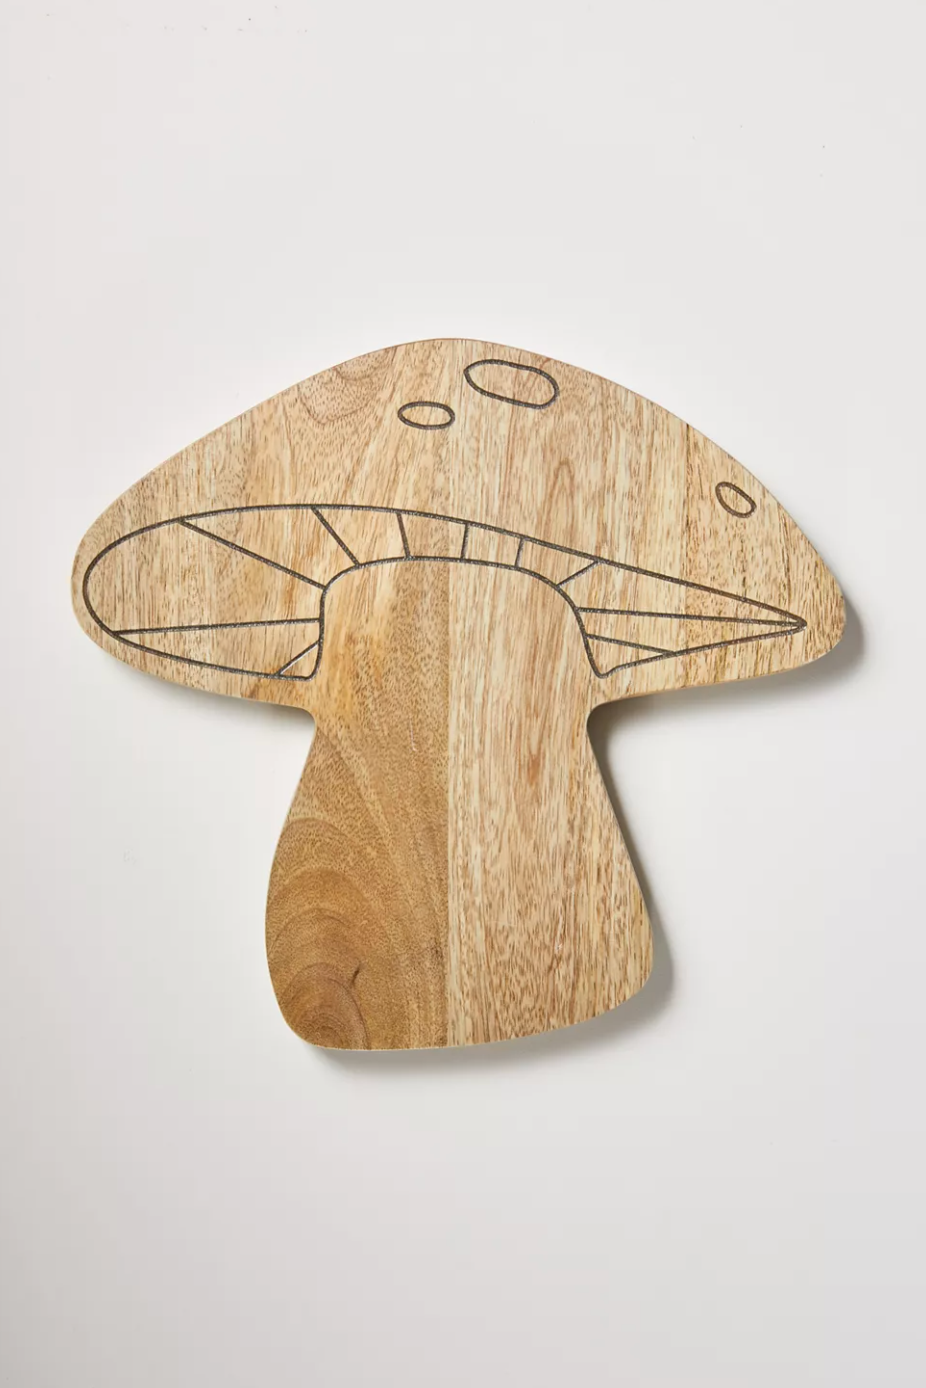 Urban Outfitters Mushroom Cheese Board